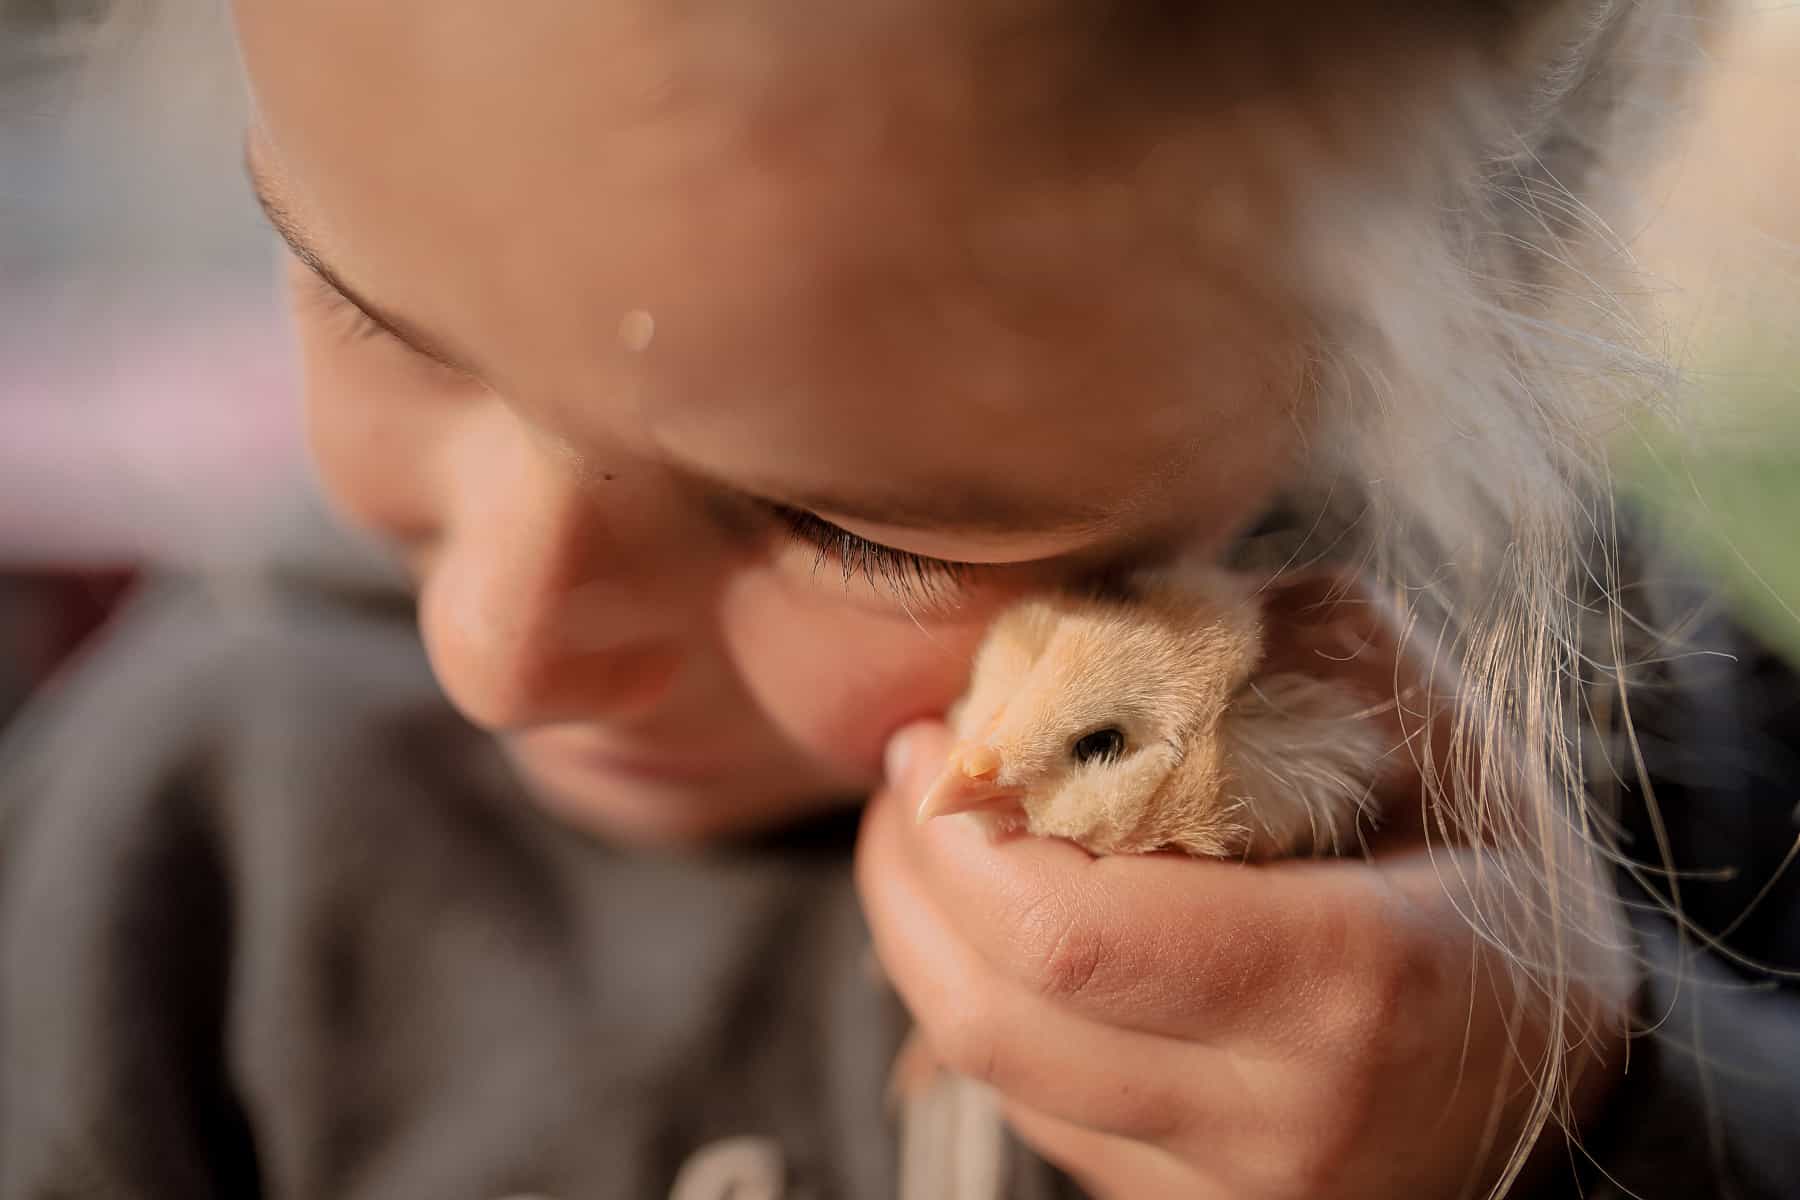 Raising Chickens with kids